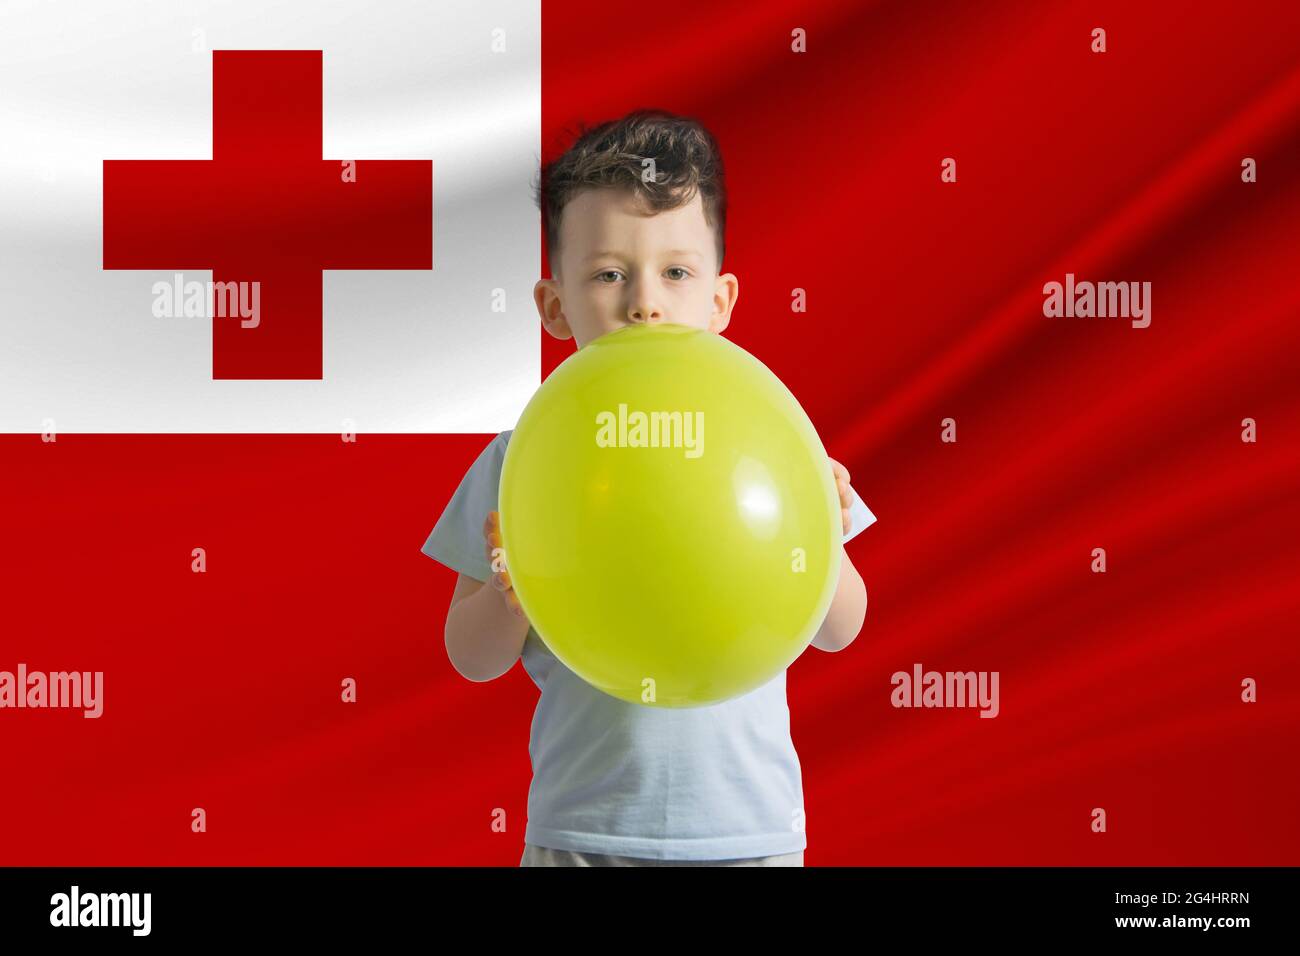 Children's day in Tonga. White boy with a balloon on the background of the flag of Tonga. Childrens day celebration concept. Stock Photo